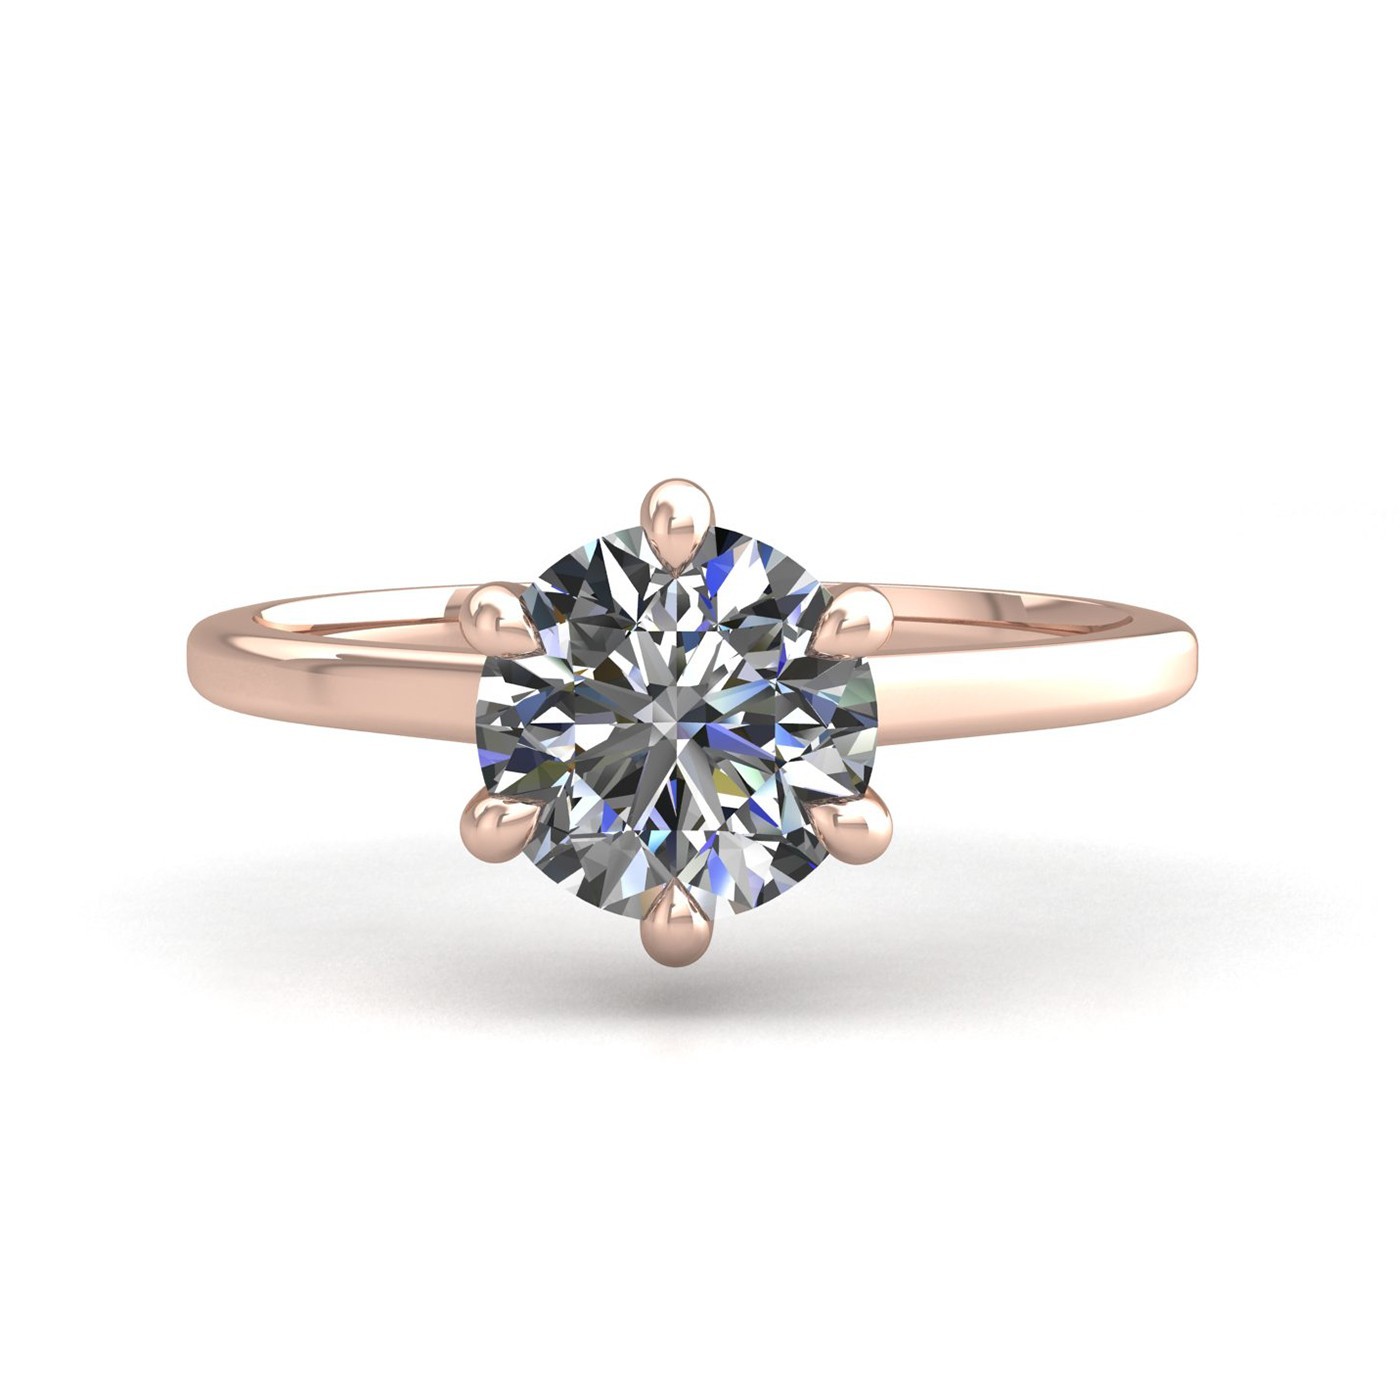 18k rose gold 0,30 ct 6 prongs solitaire round cut diamond engagement ring with whisper thin band Photos & images